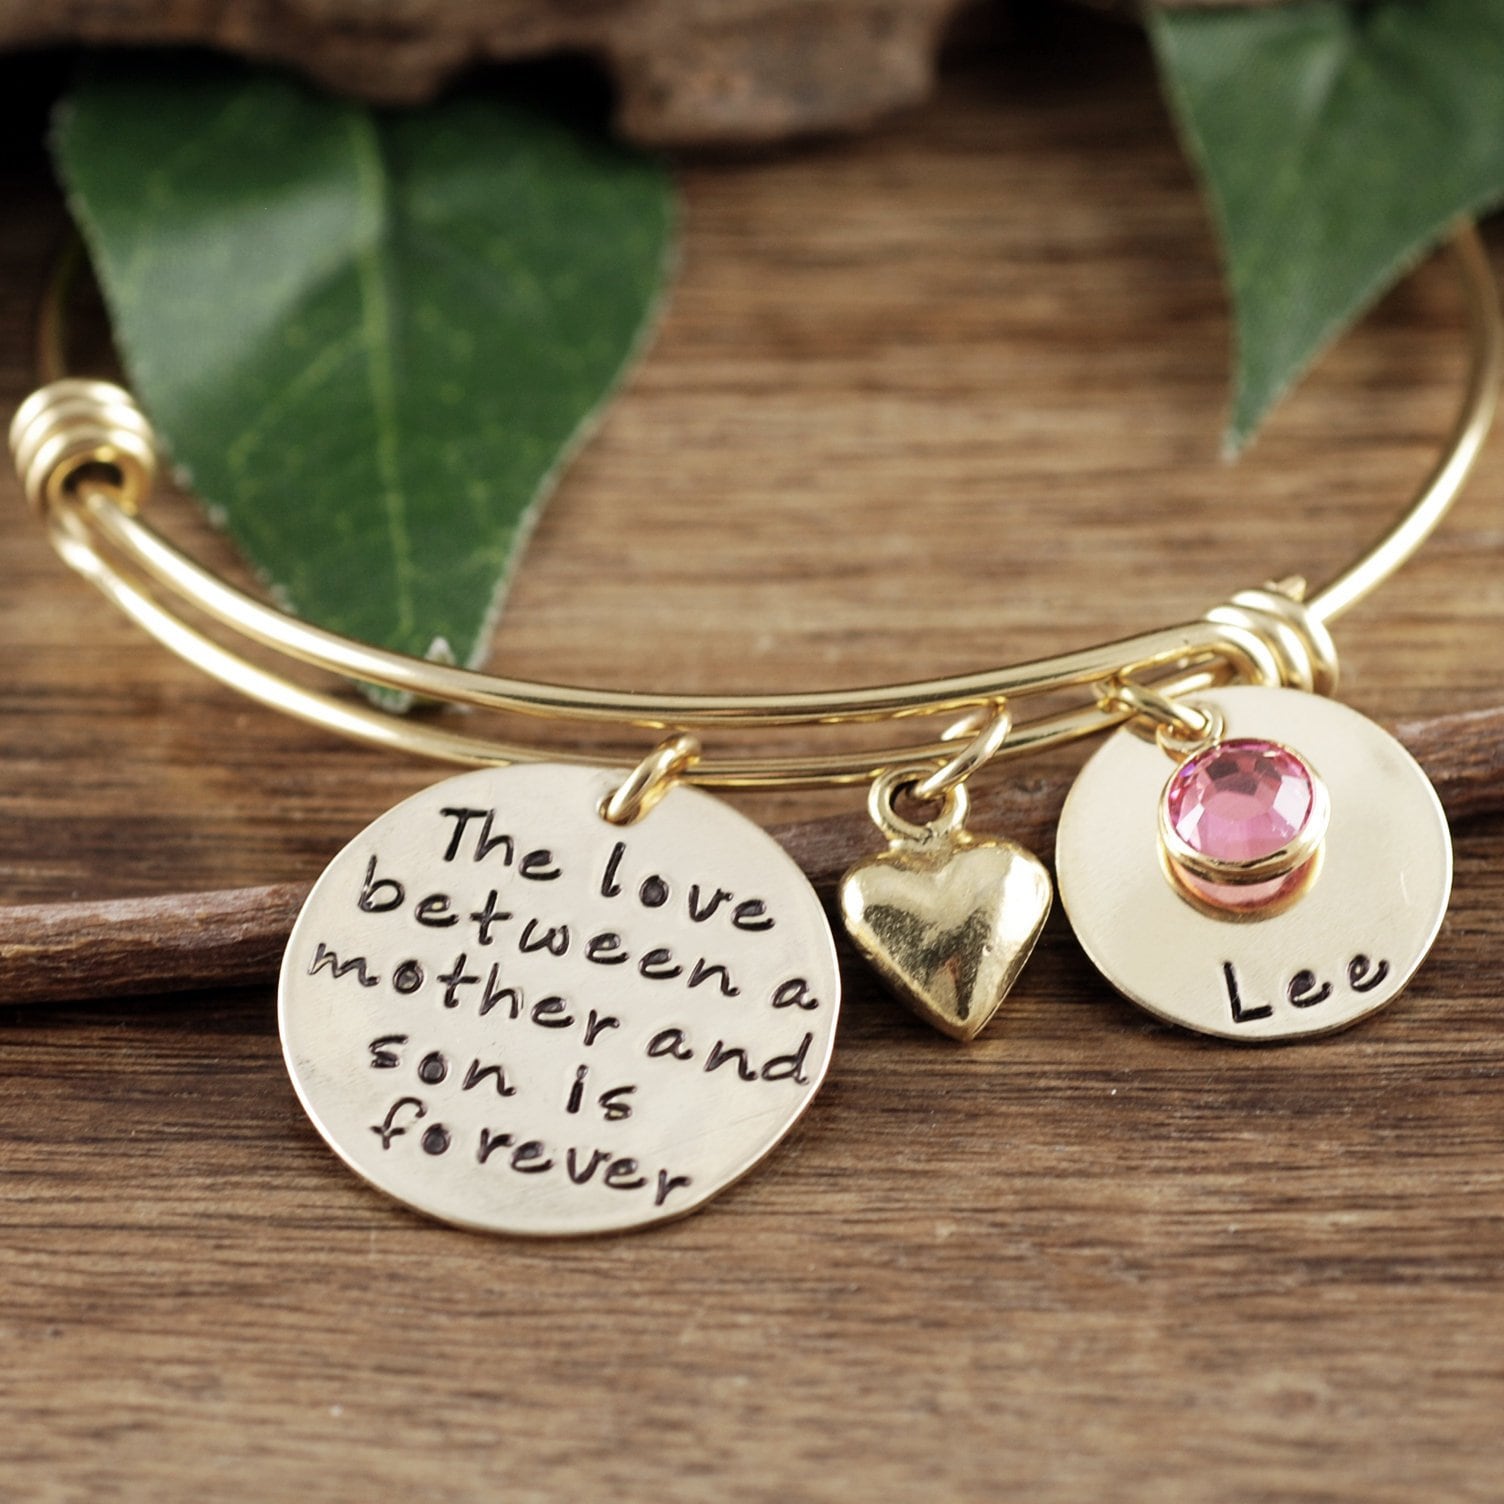 Personalized Engraved Name Charm Bangle Bracelet for Moms and Grandmas  Customizable Gift for Mother's Day, Birthday or Any Occasion - Etsy